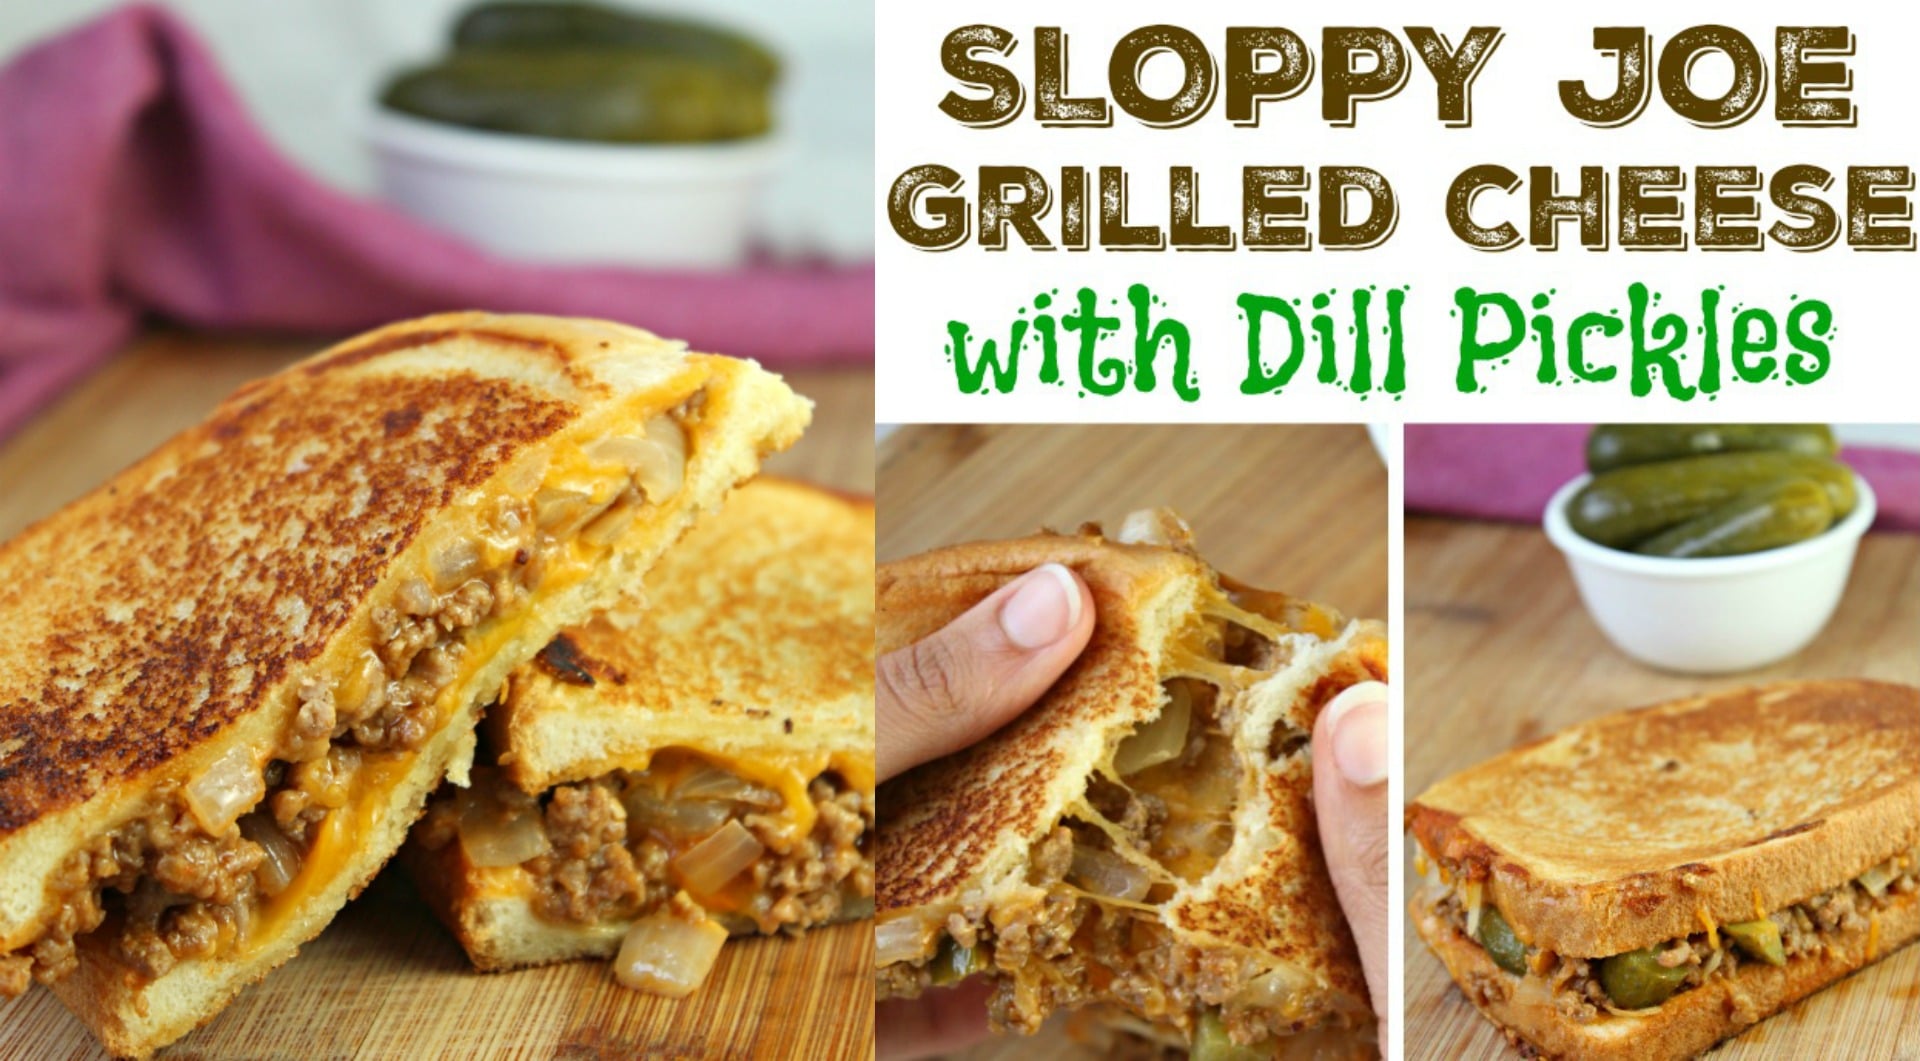 Dill Pickle Sloppy Joe Grilled Cheese